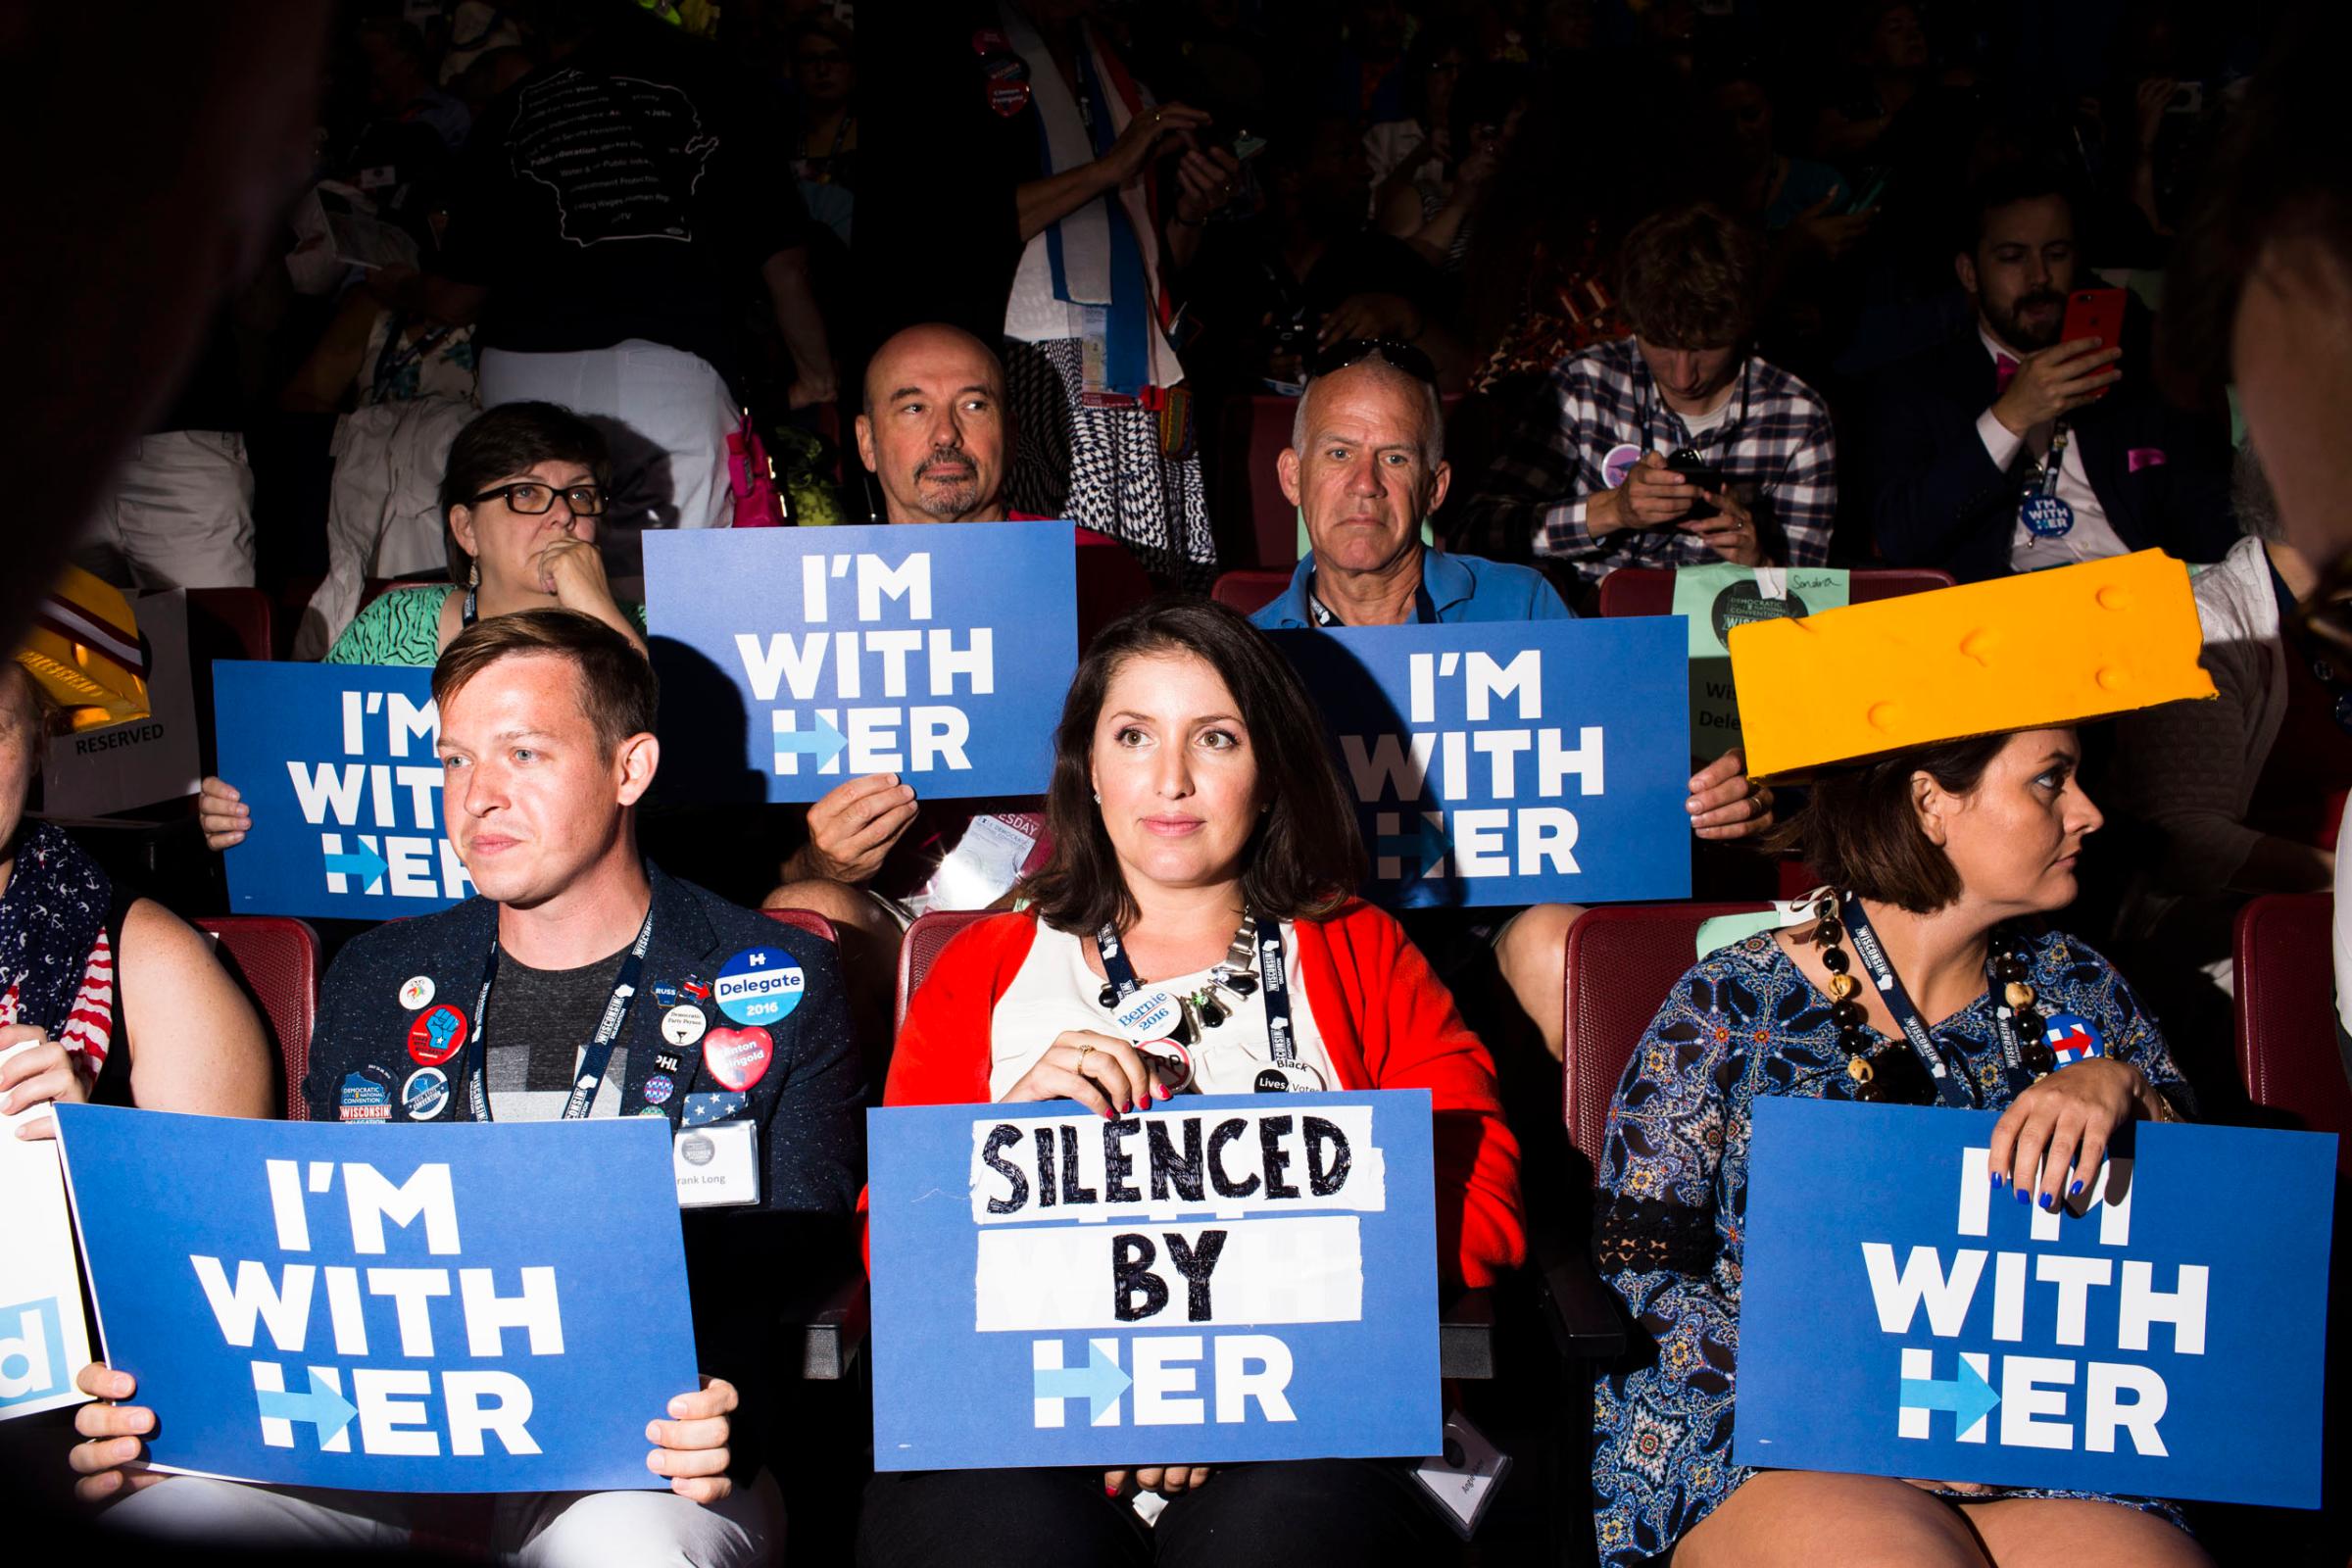 Scenes from the floor at the 2016 Democratic National Convention in Philadelphia on Tuesday, July 26, 2016.